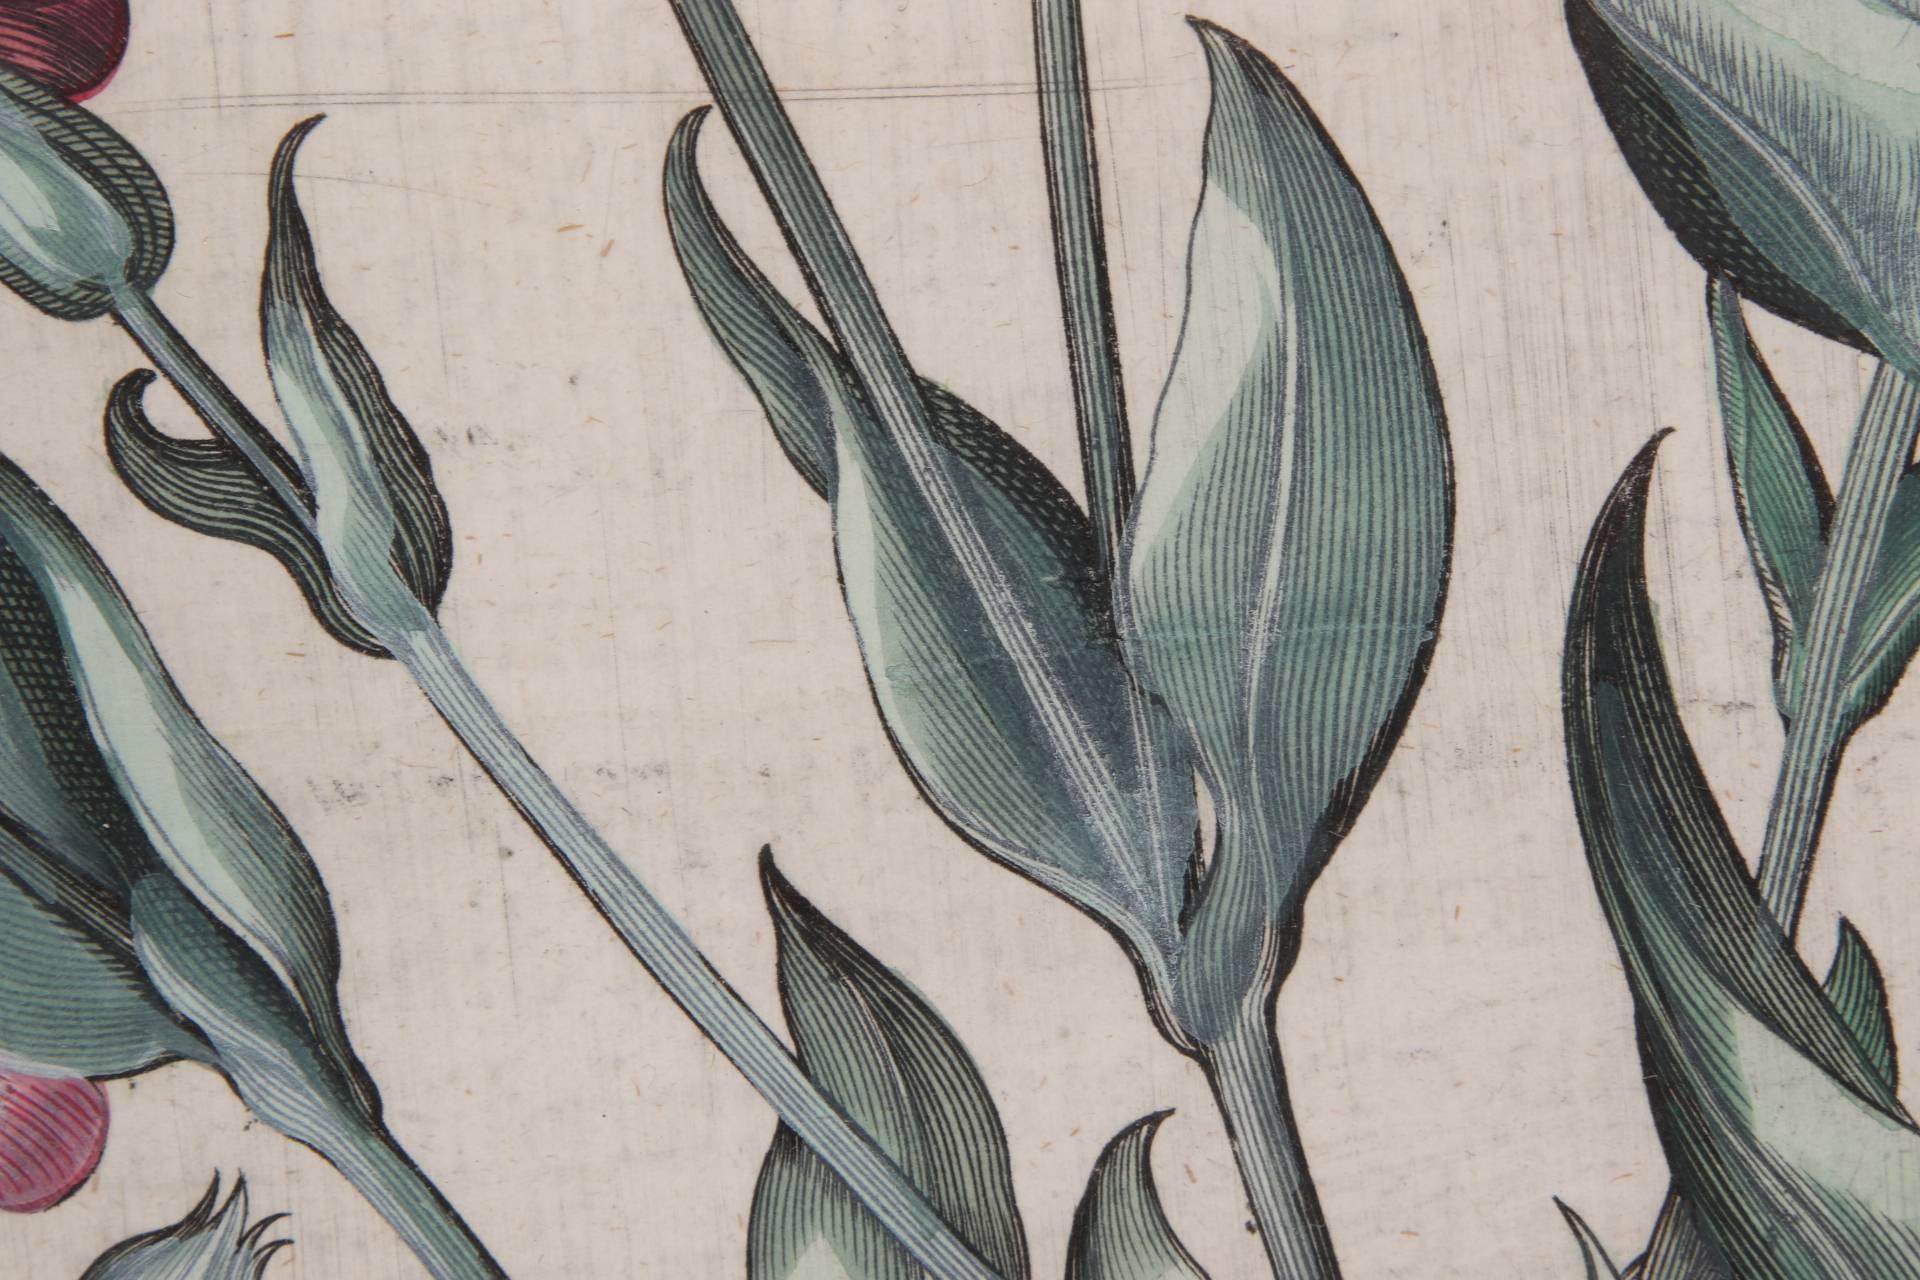 Pair of Early 17th Century Hand-Colored Folio Botanicals by Basil Besler 1